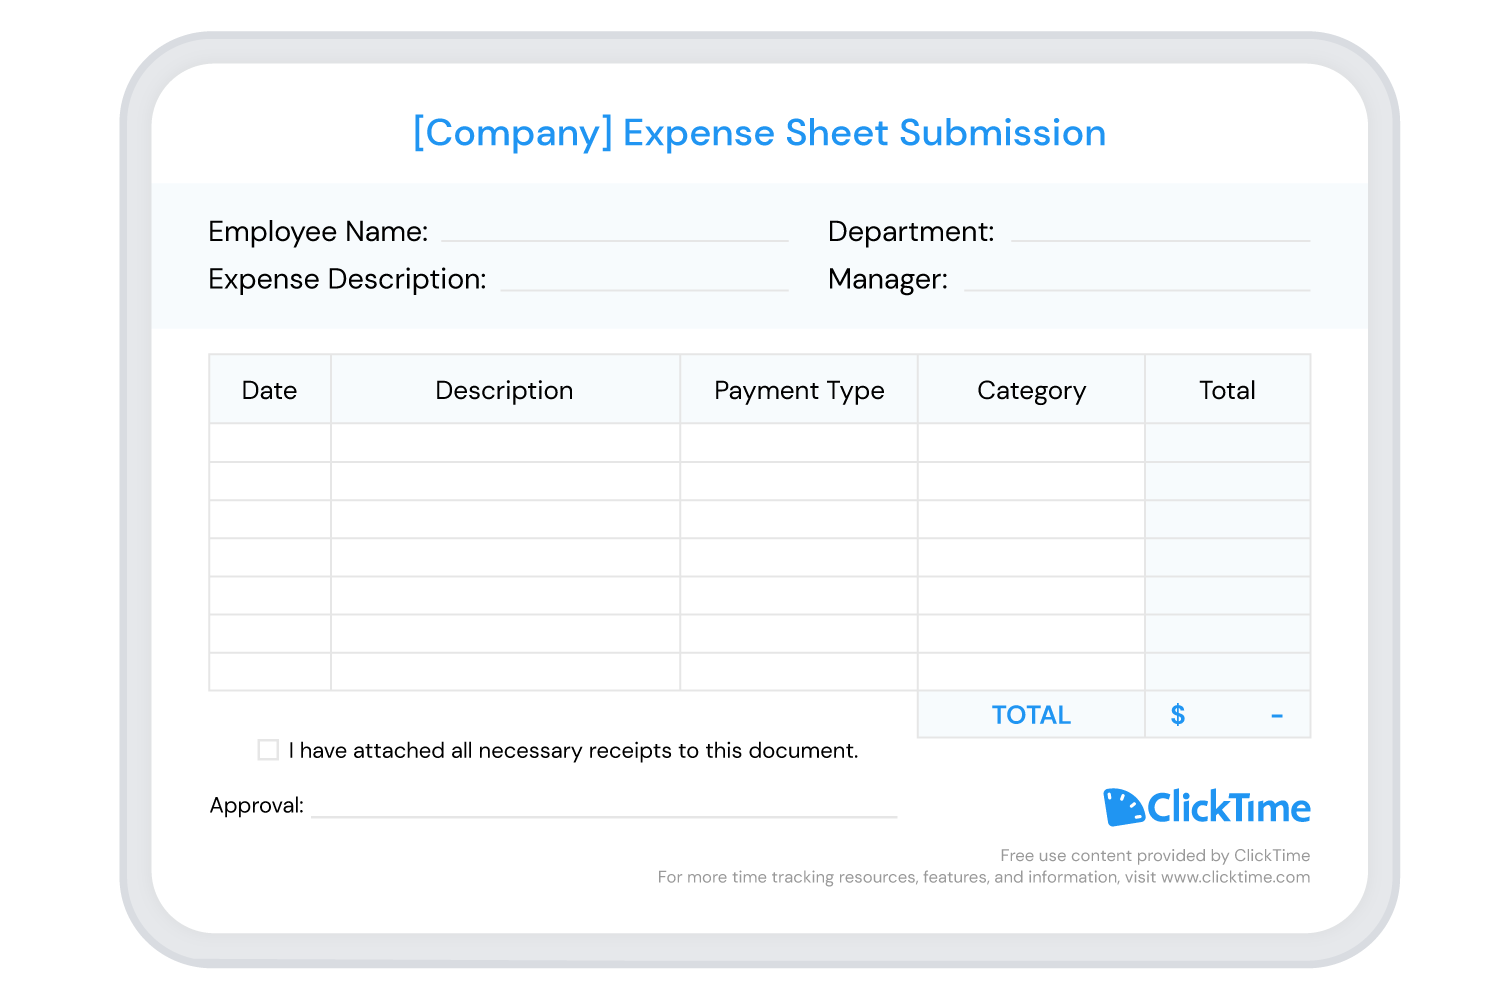 expense report template